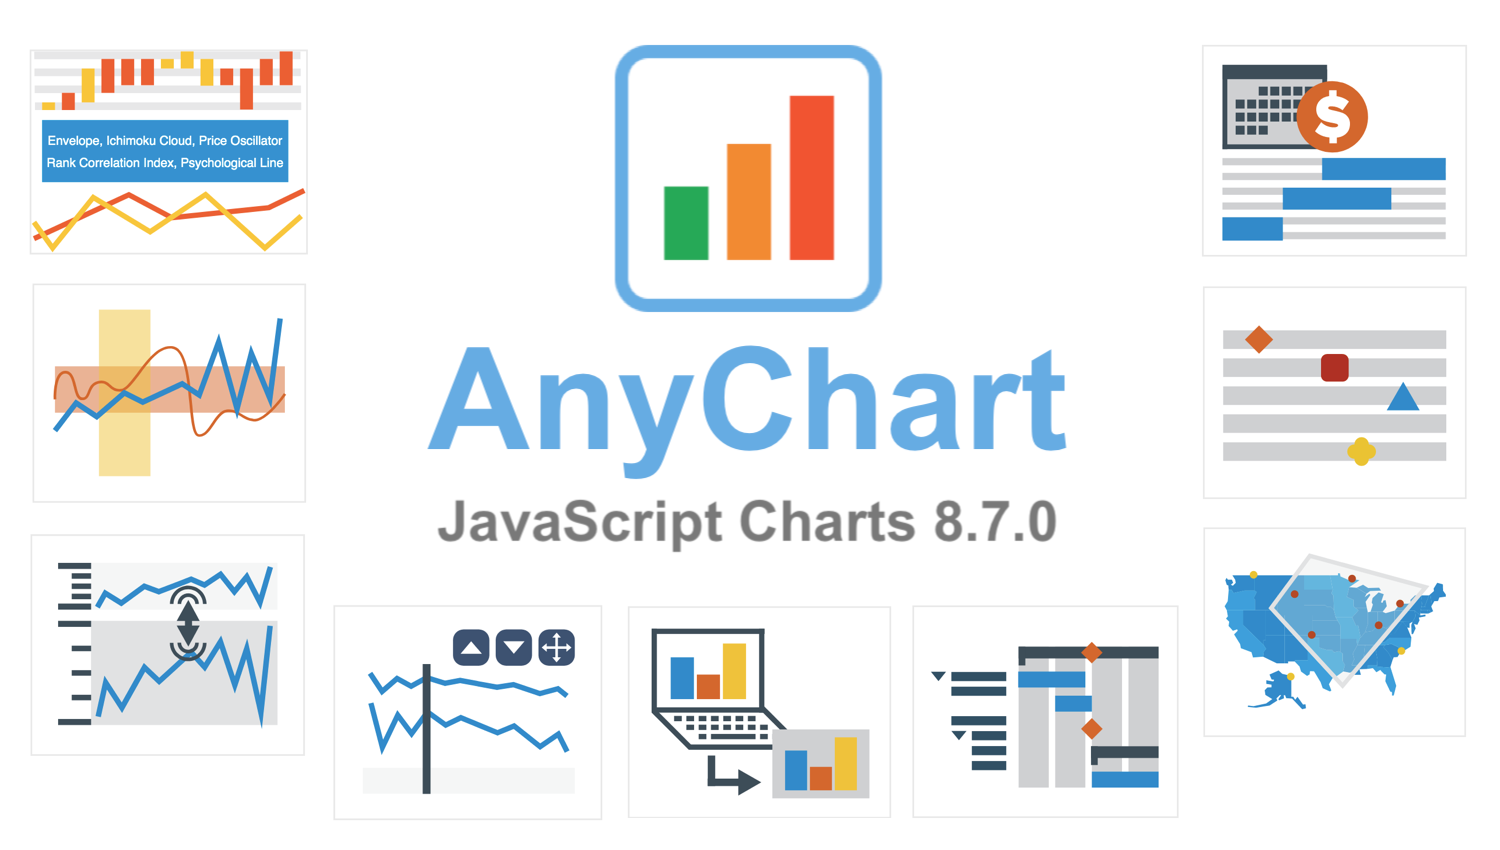 JavaScript Graph Visualization Libraries Updated - Check Out AnyChart 8.7.0 with New Awesome JS Charting Features!